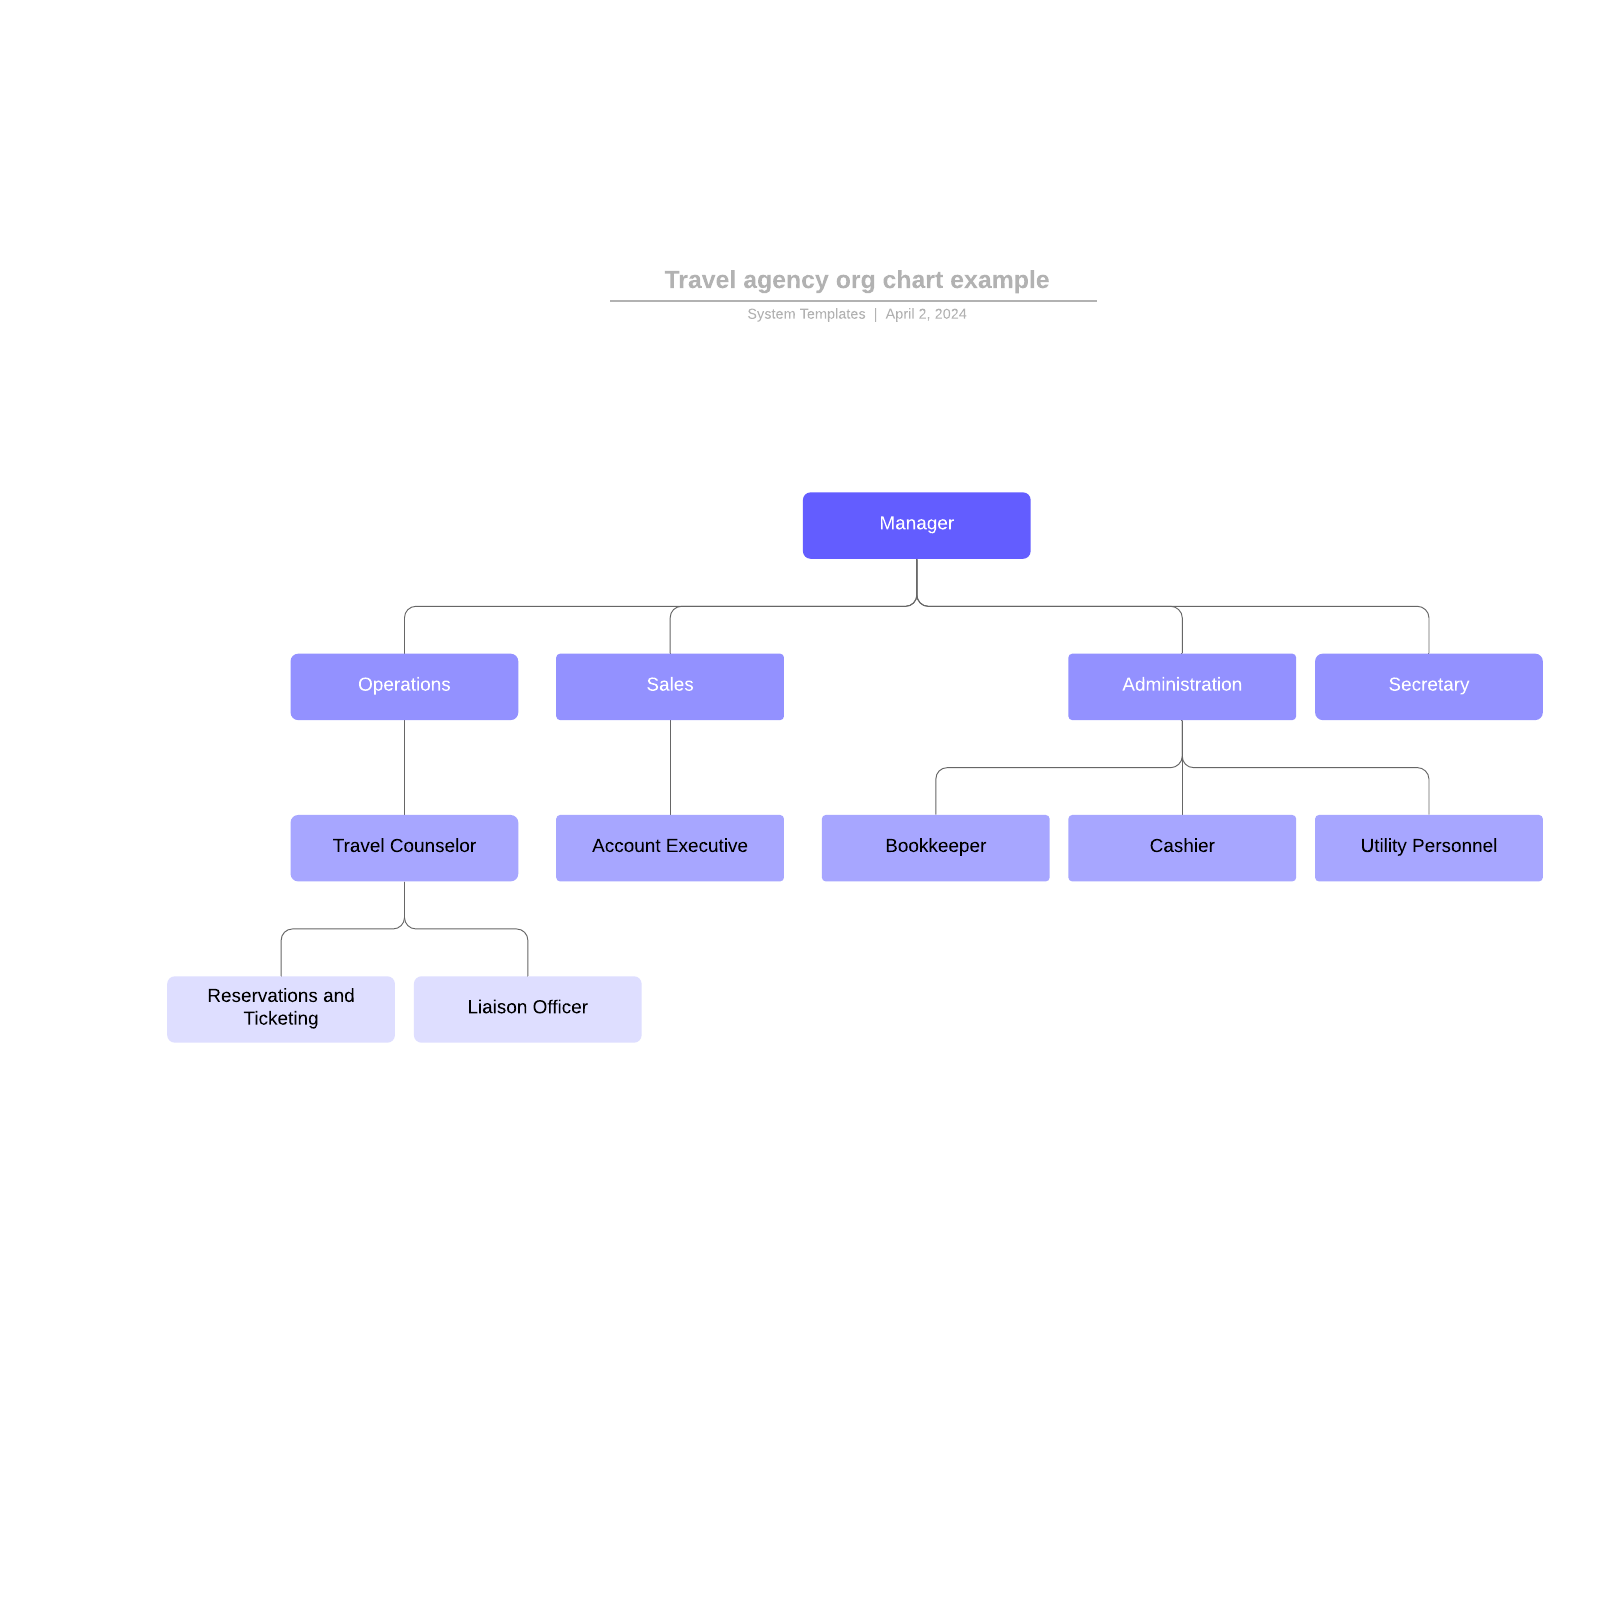 Travel agency org chart example example